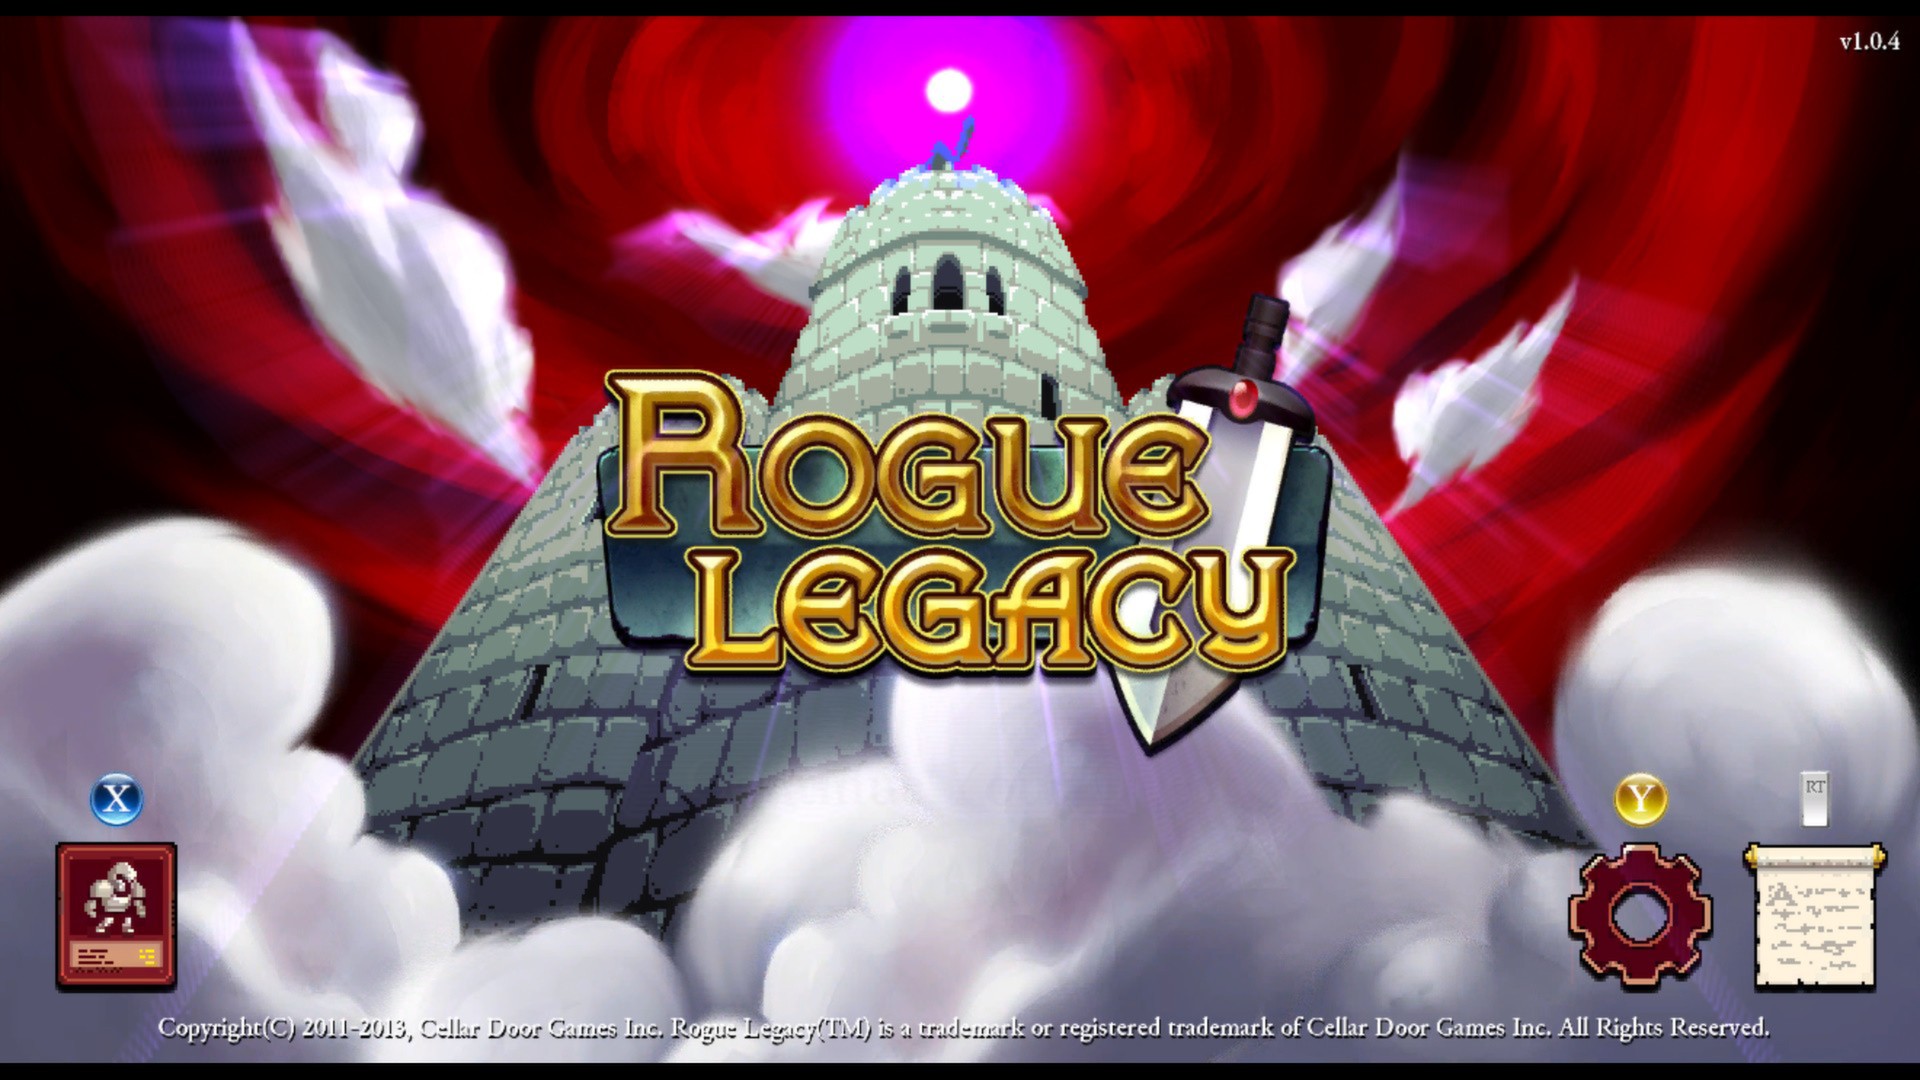 Find the best laptops for Rogue Legacy